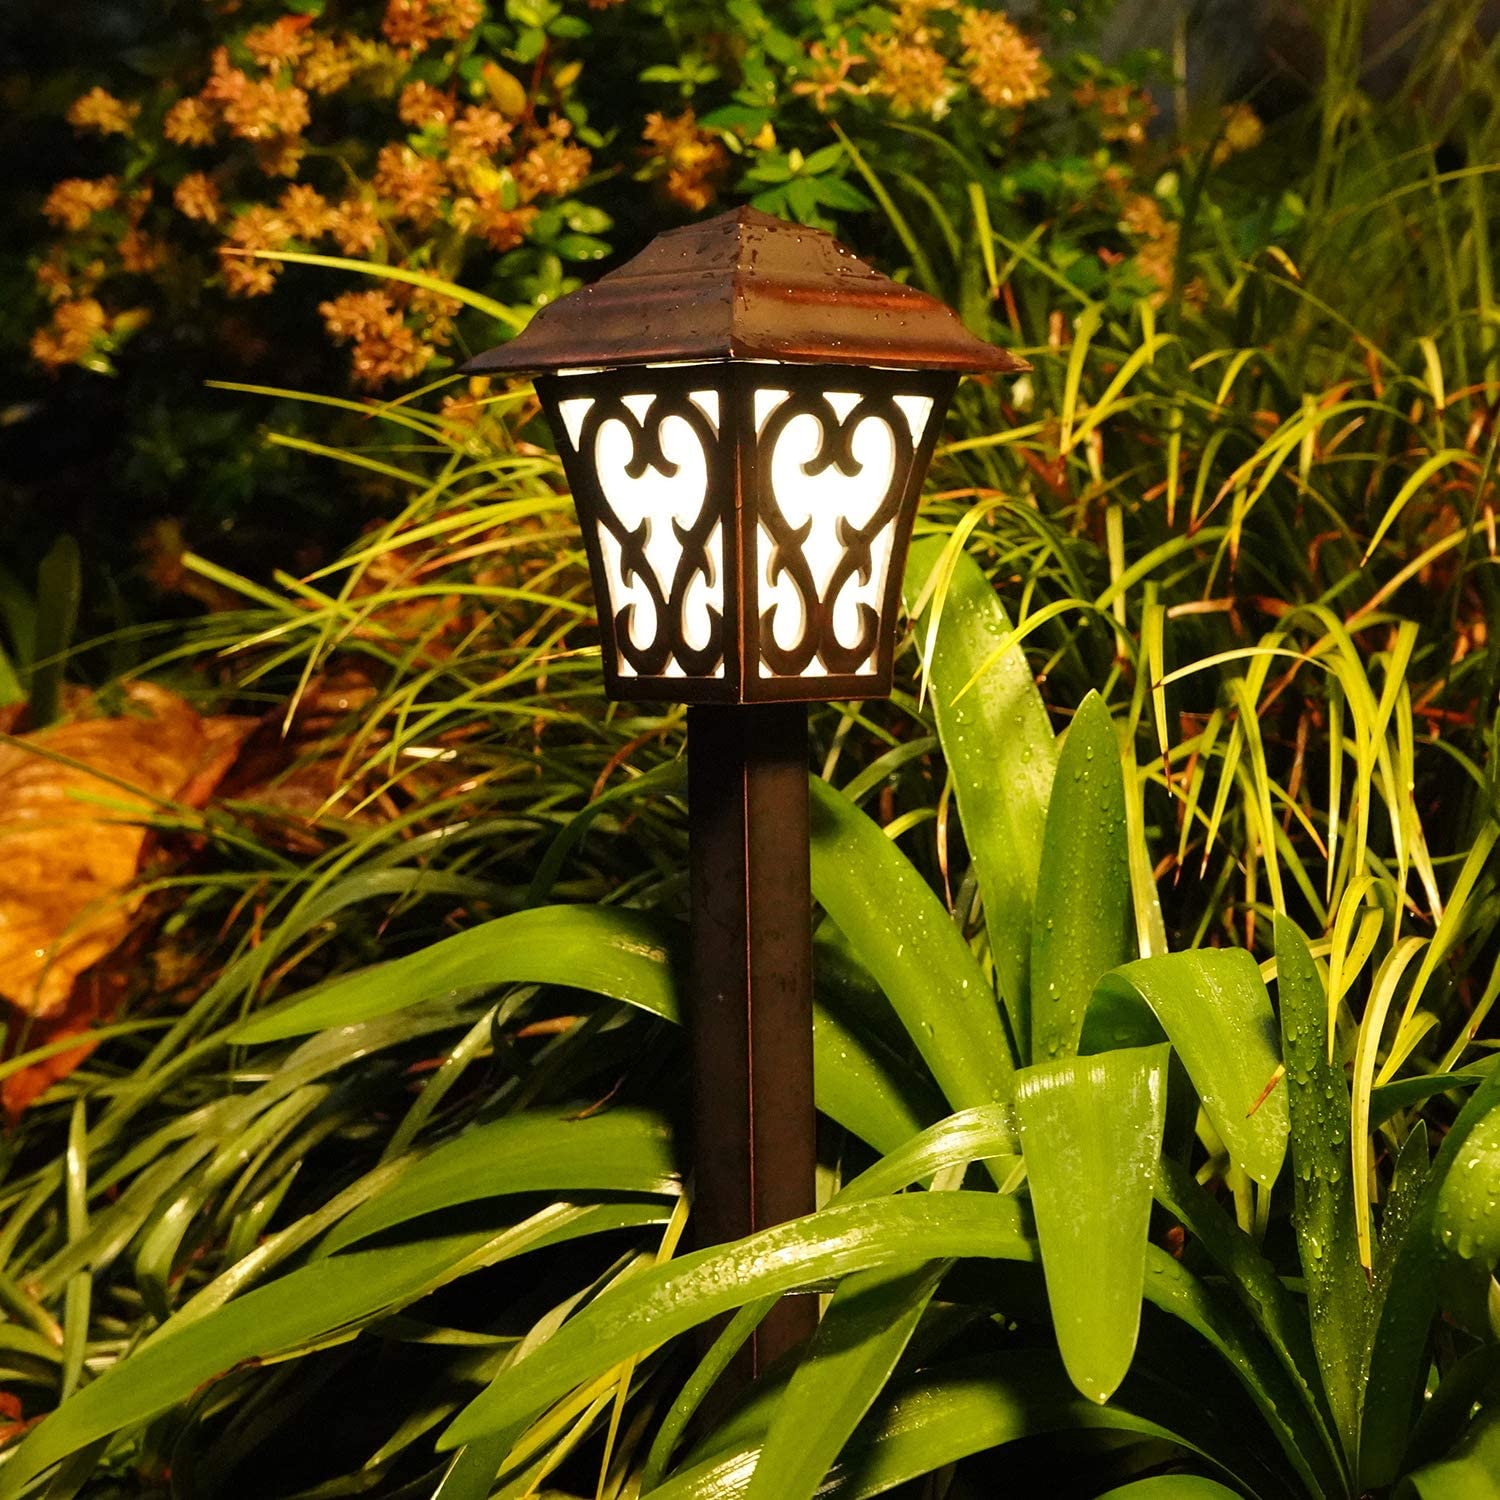 Malibu LED 4W In Ground Well Lights Low Voltage Landscape Lighting Low -  Venus Manufacturing